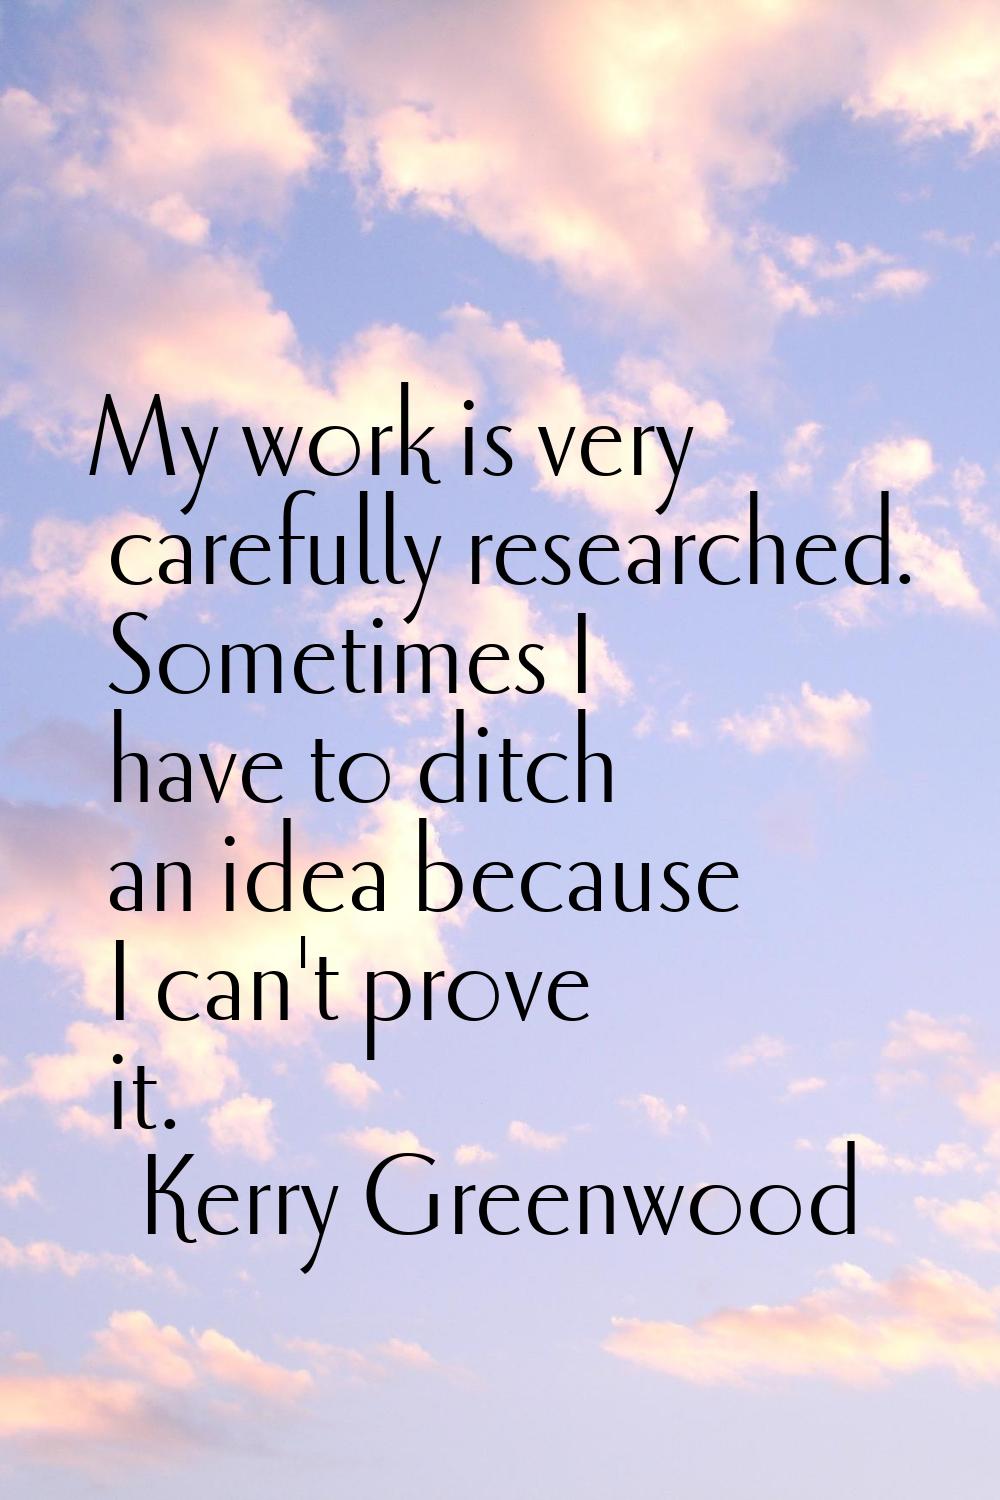 My work is very carefully researched. Sometimes I have to ditch an idea because I can't prove it.